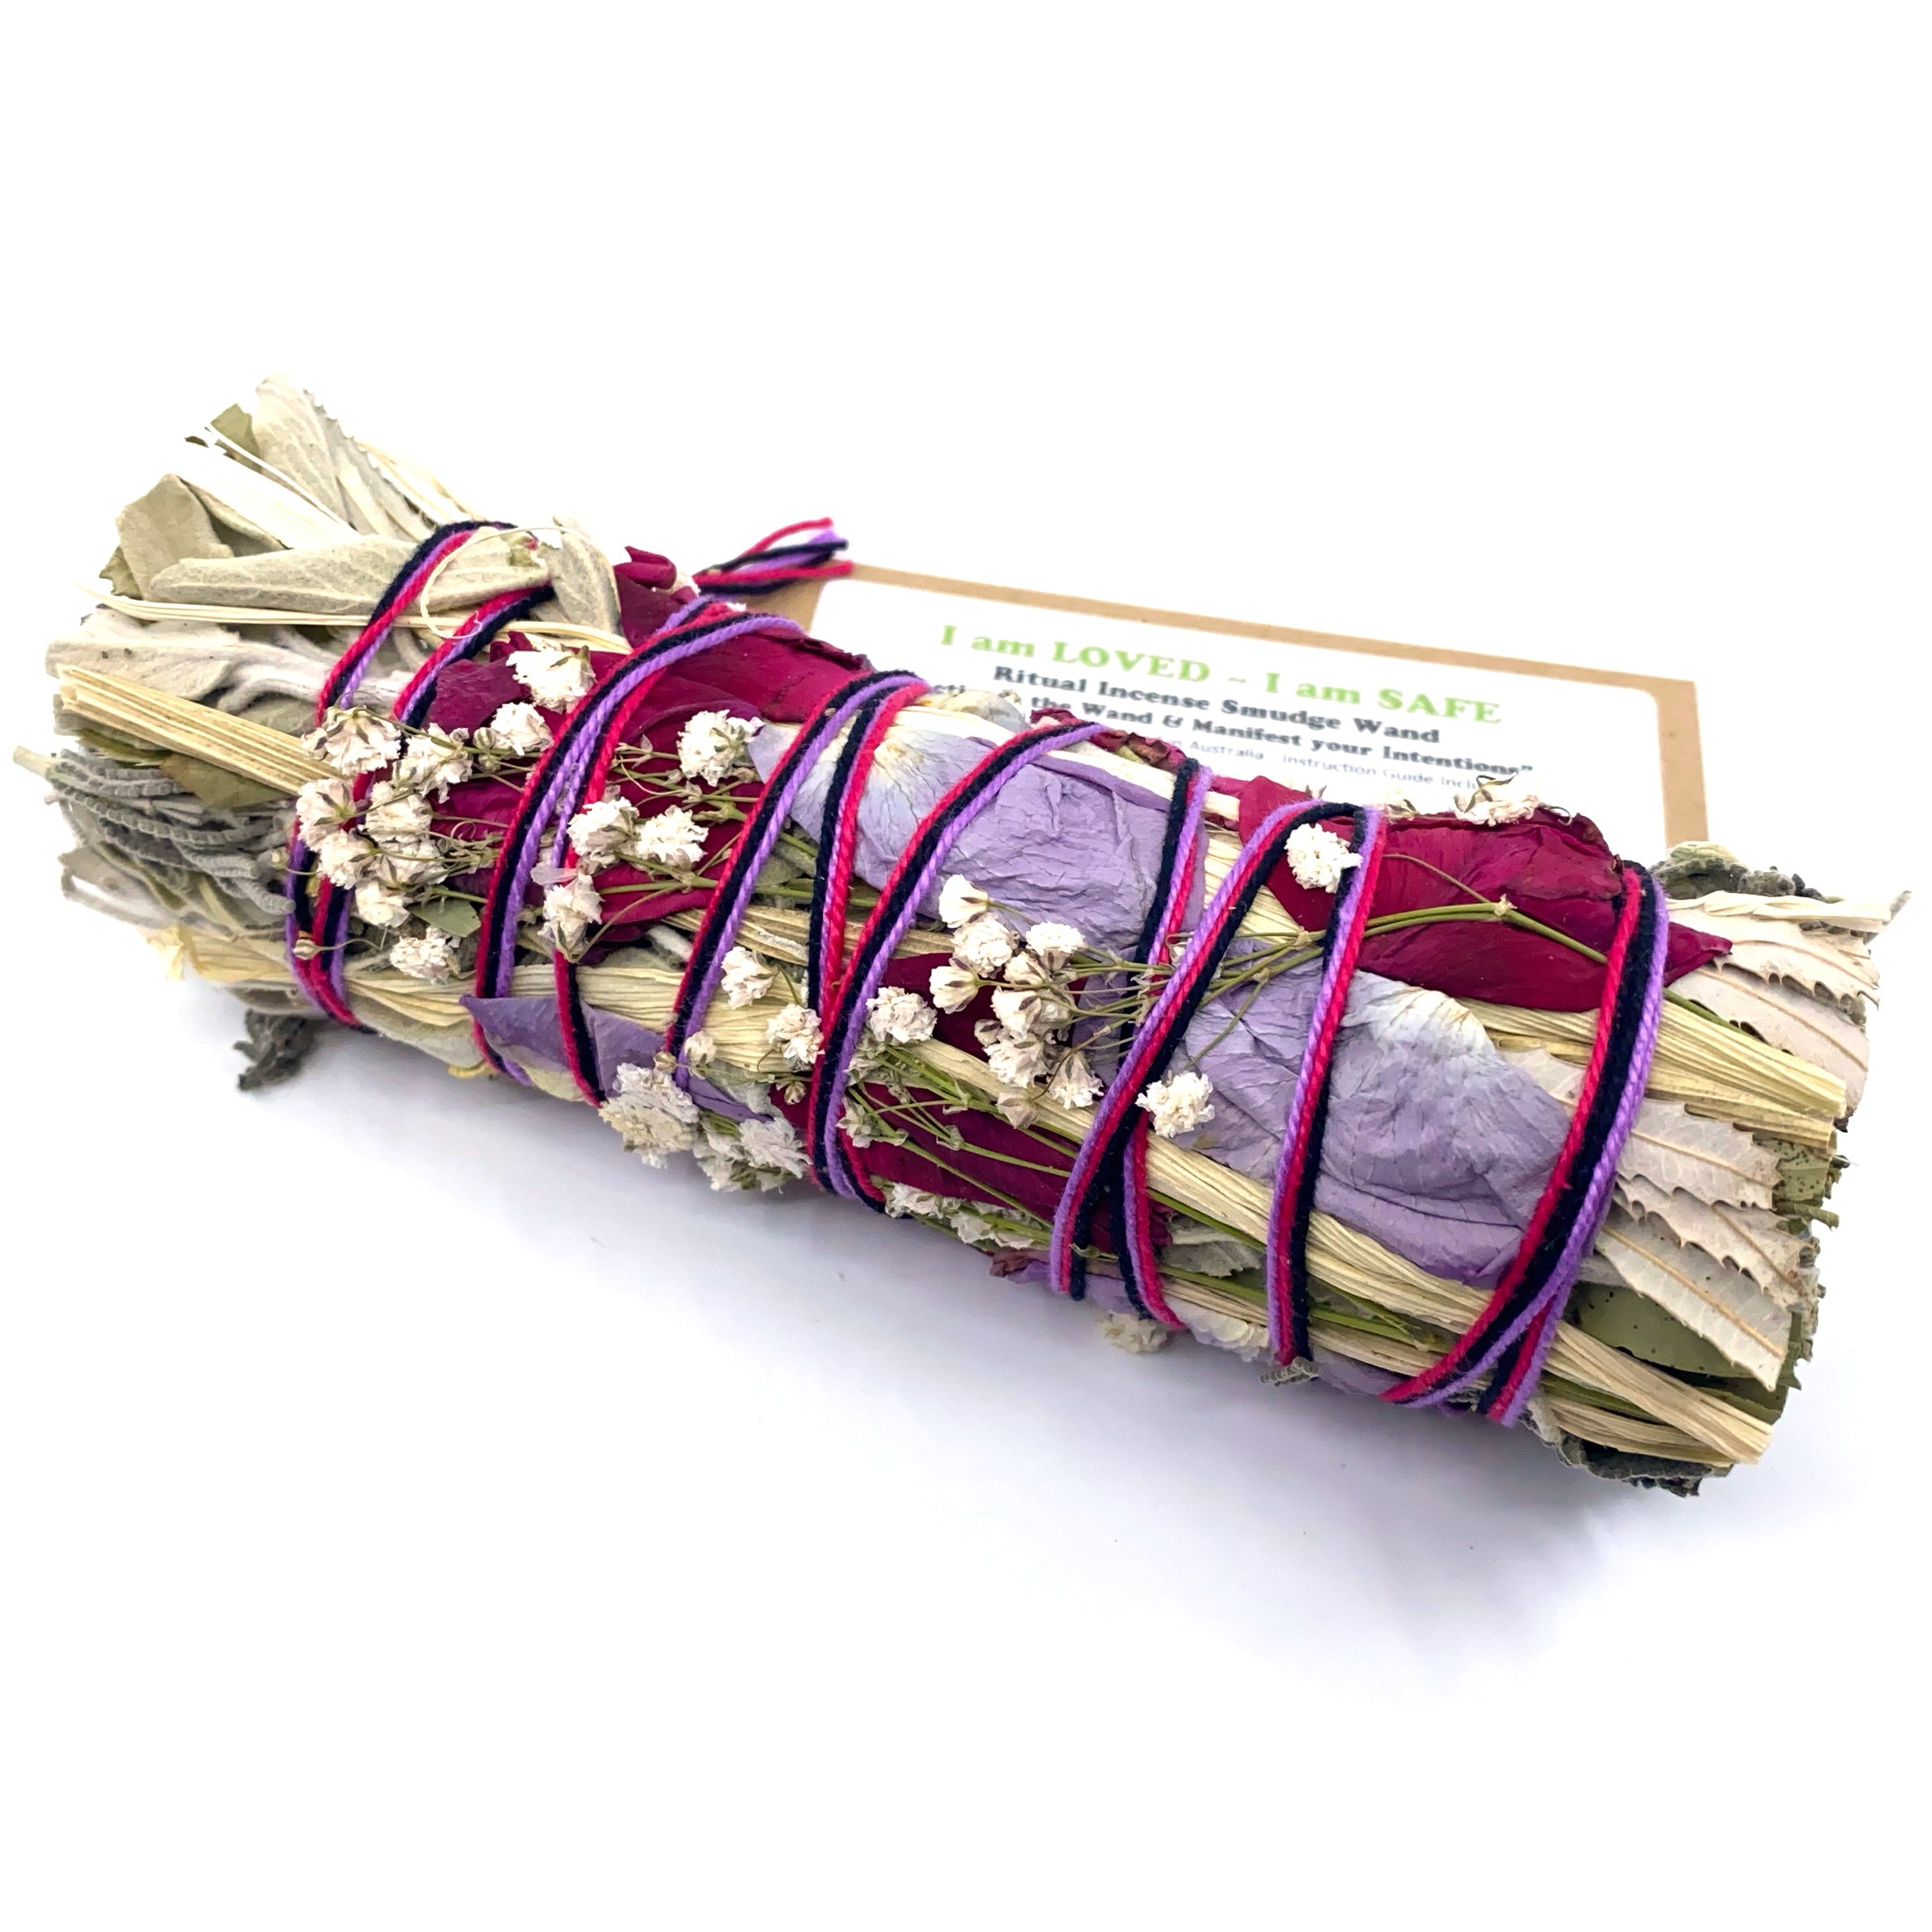 I am Enough - With Good Intentions Smudge Stick